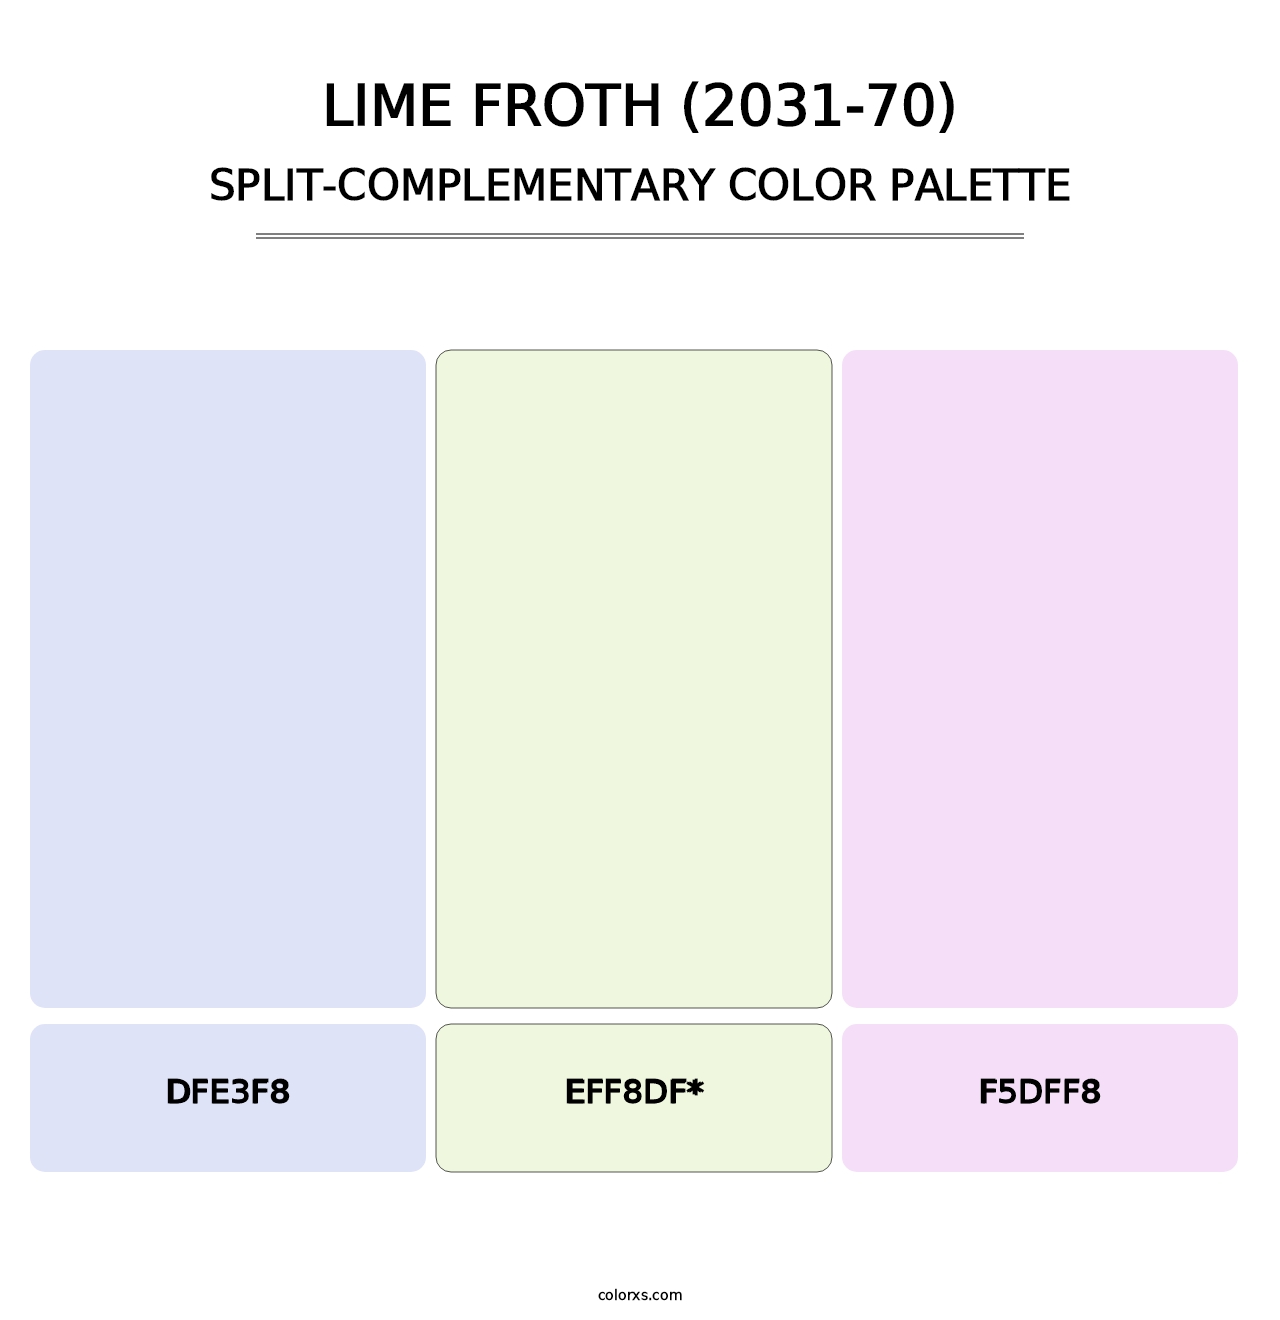 Lime Froth (2031-70) - Split-Complementary Color Palette